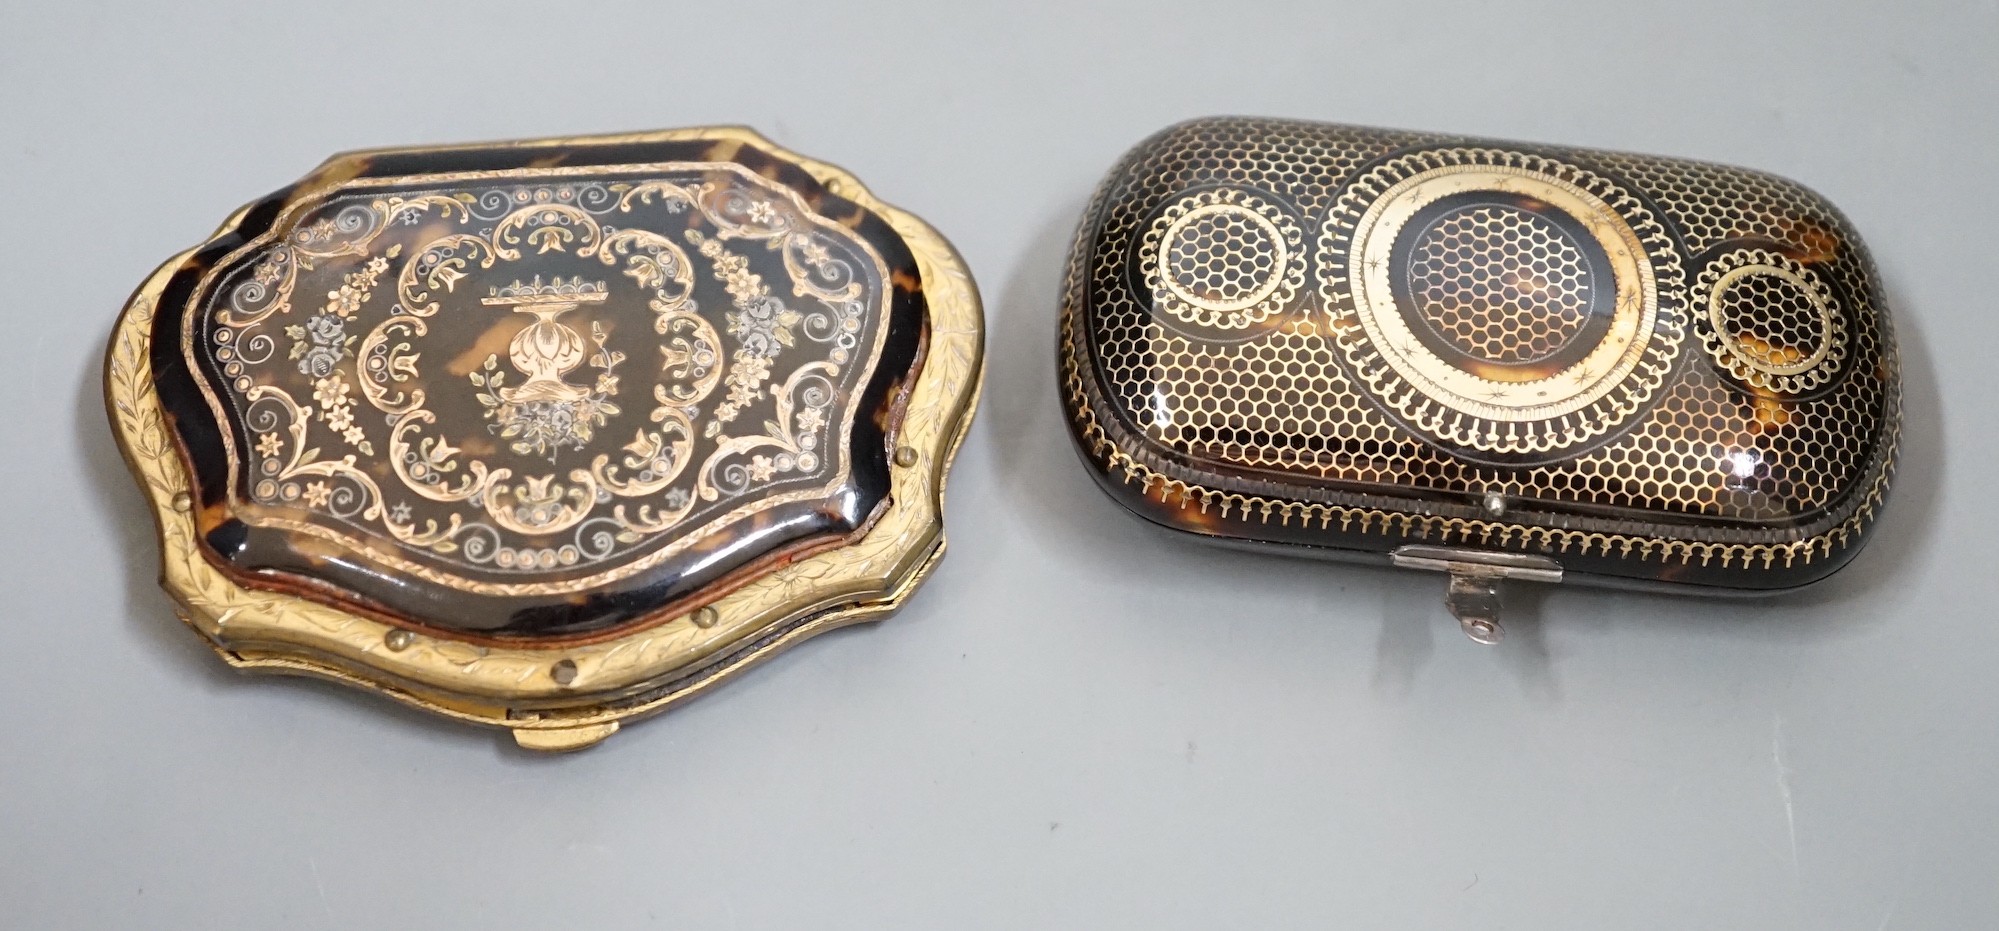 A 19th century finely worked tortoiseshell piqué work purse, with blue silk lining and a similar git